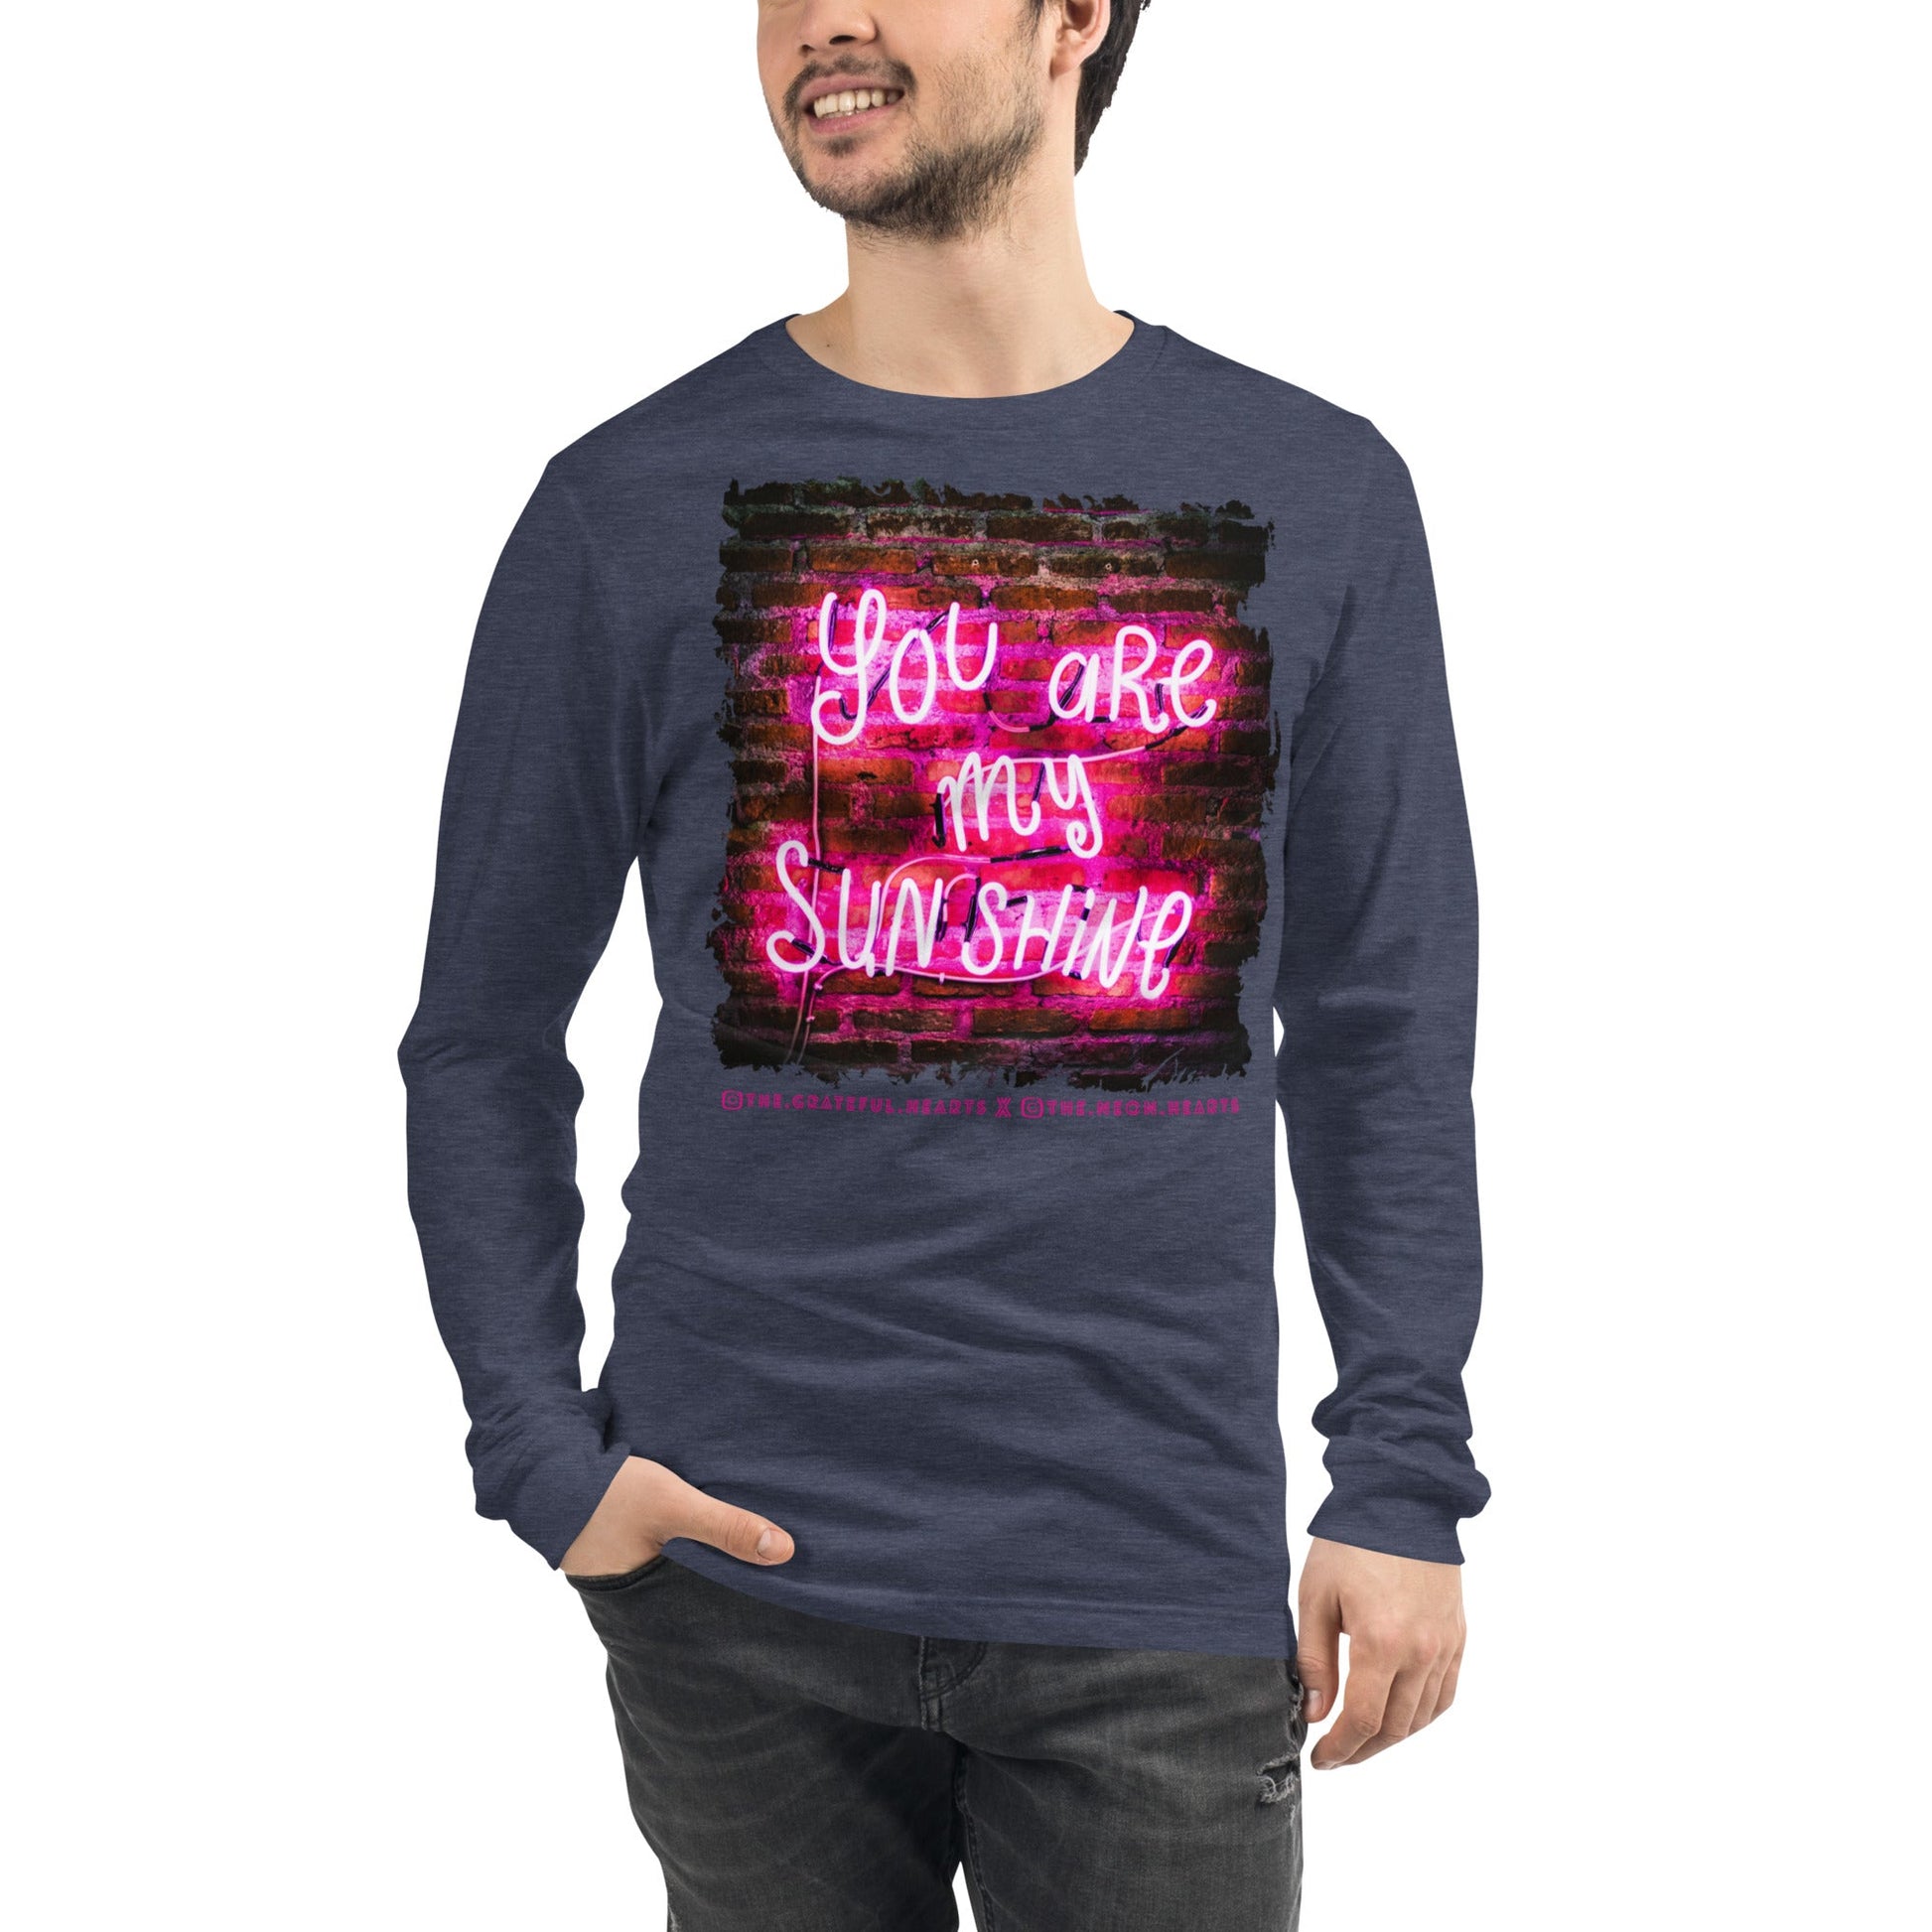 You Are My Sunshine ❤️ - Unisex Long Sleeve t-shirt (Available in Various Colors 💖💙💜) - The Grateful Hearts